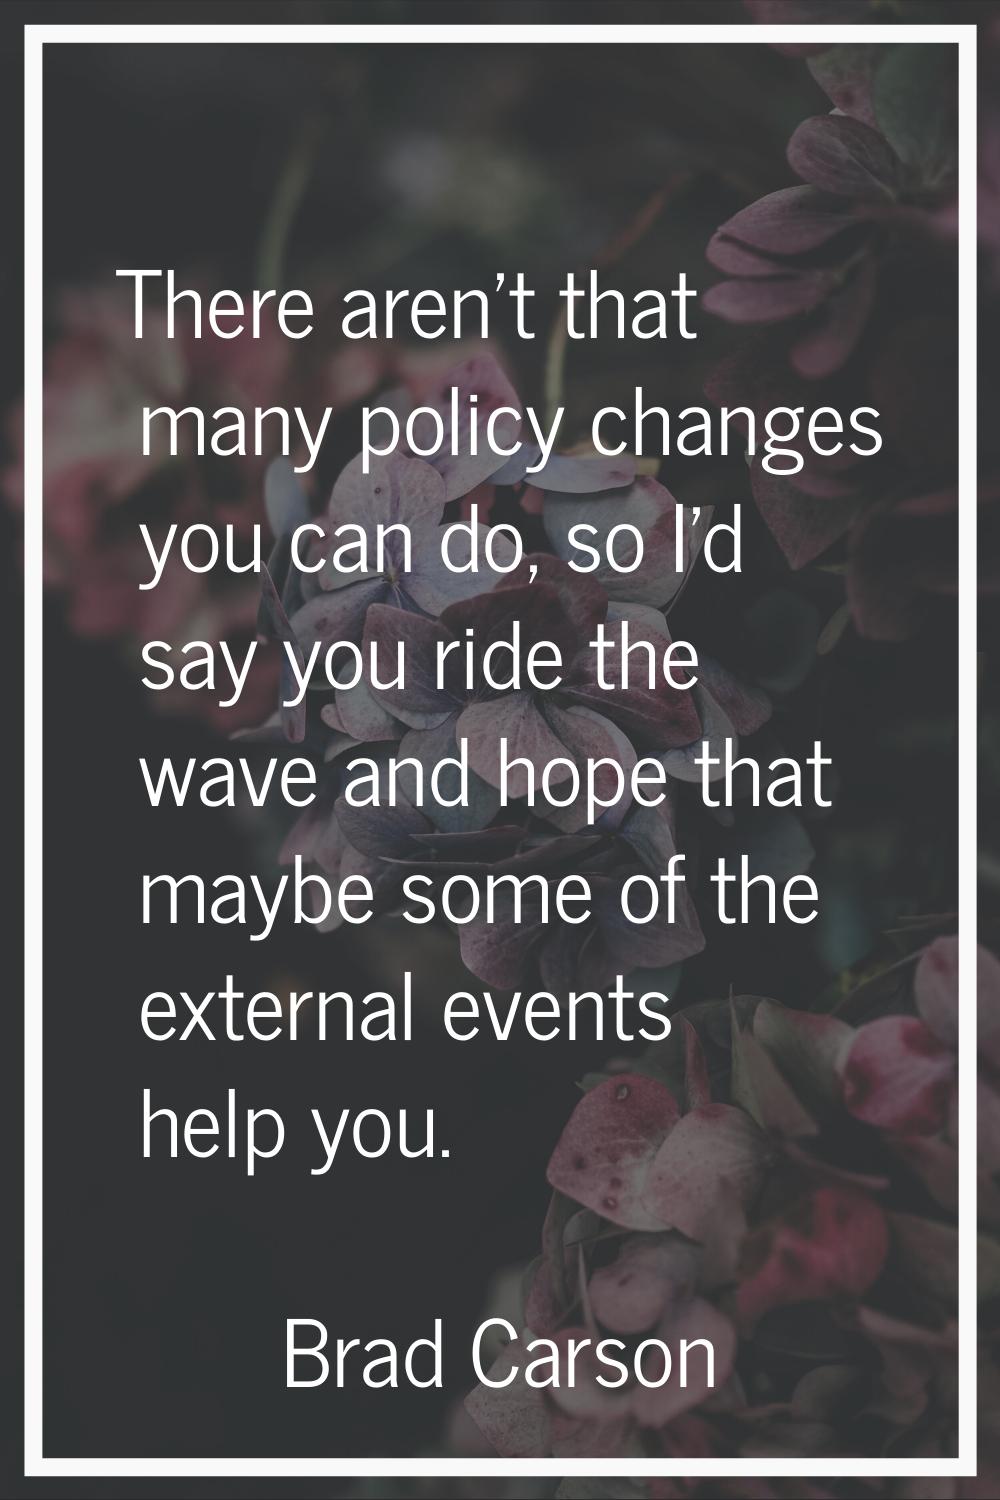 There aren't that many policy changes you can do, so I'd say you ride the wave and hope that maybe 